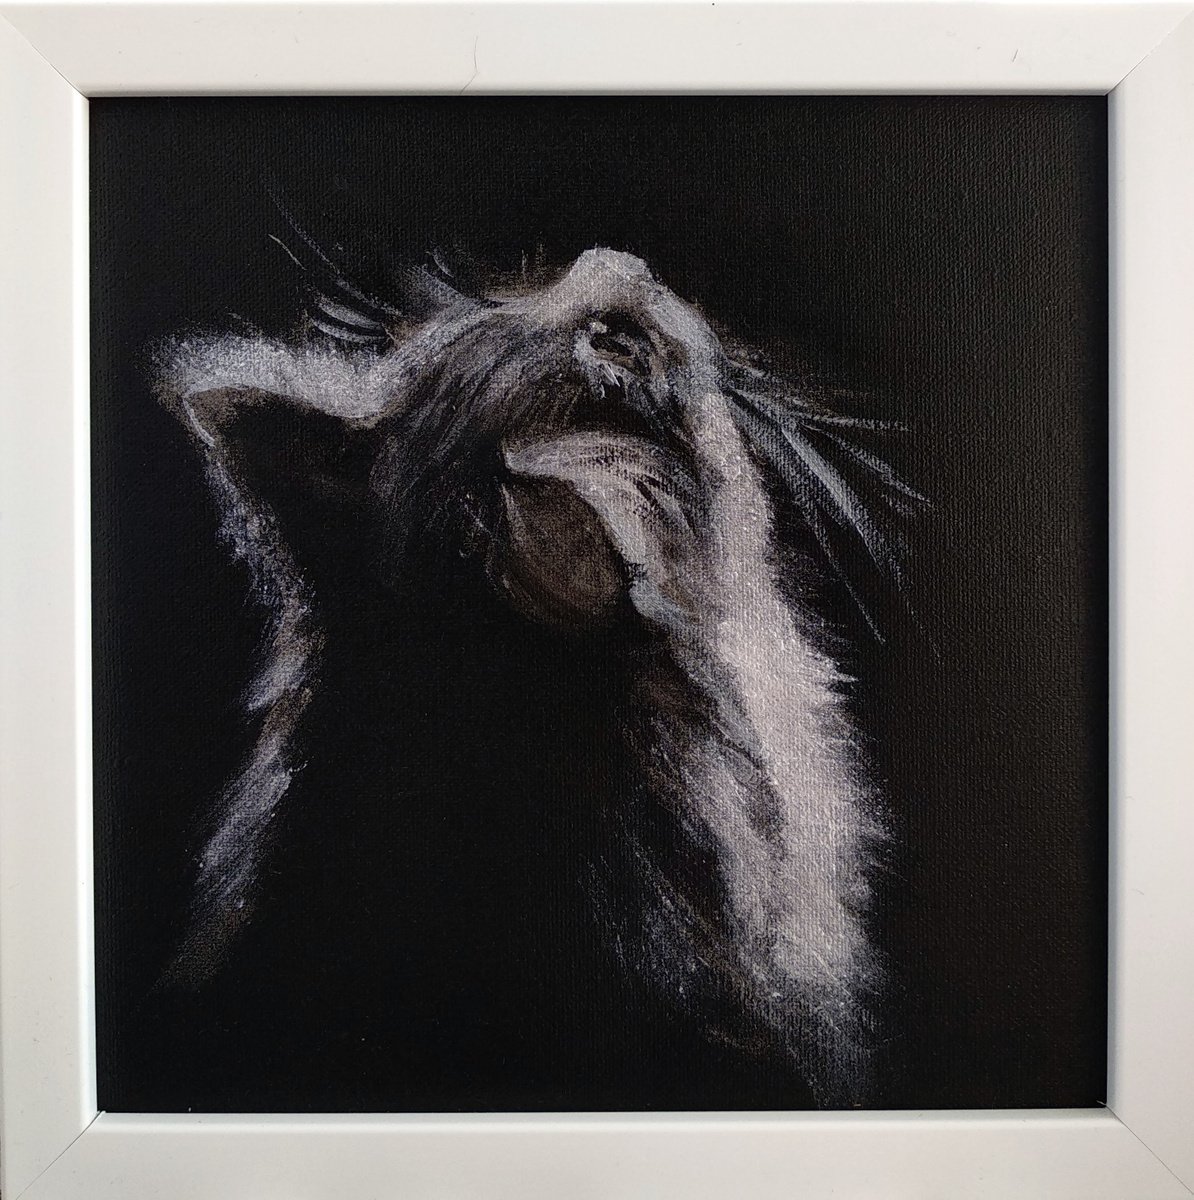 Little cat Black and Silver Monochrome art Framed and Ready to hang by Anastasia Art Line